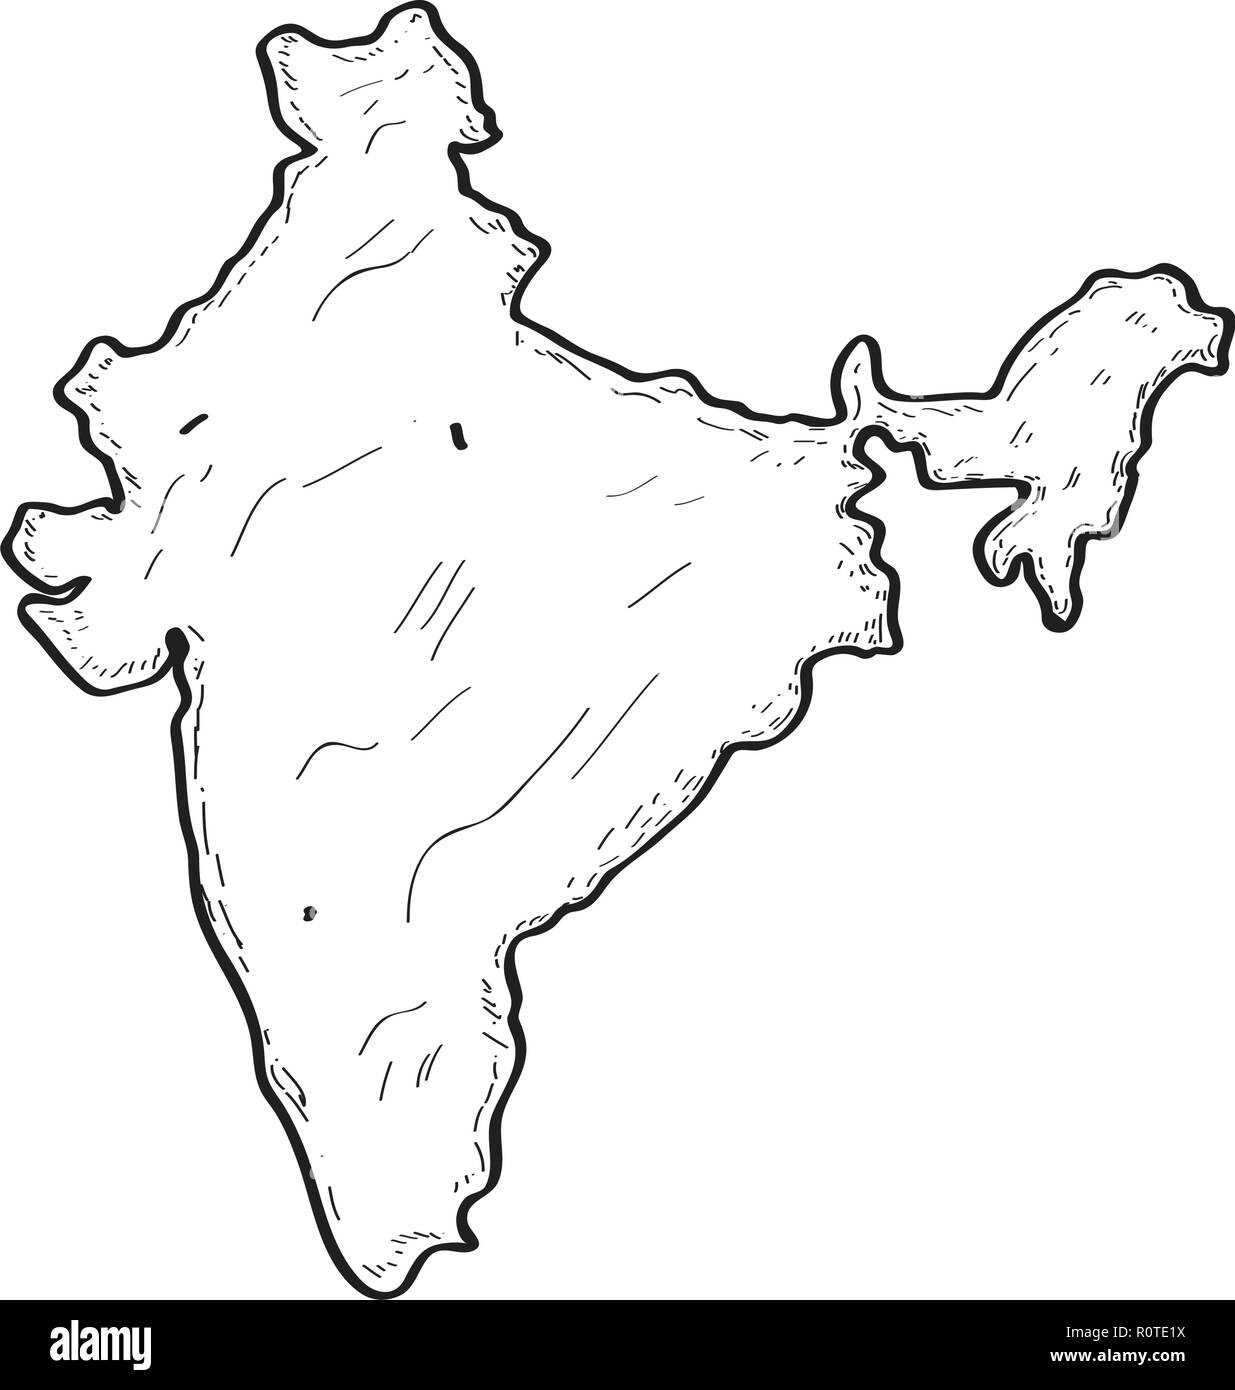 Sketch of a map of India Stock Vector